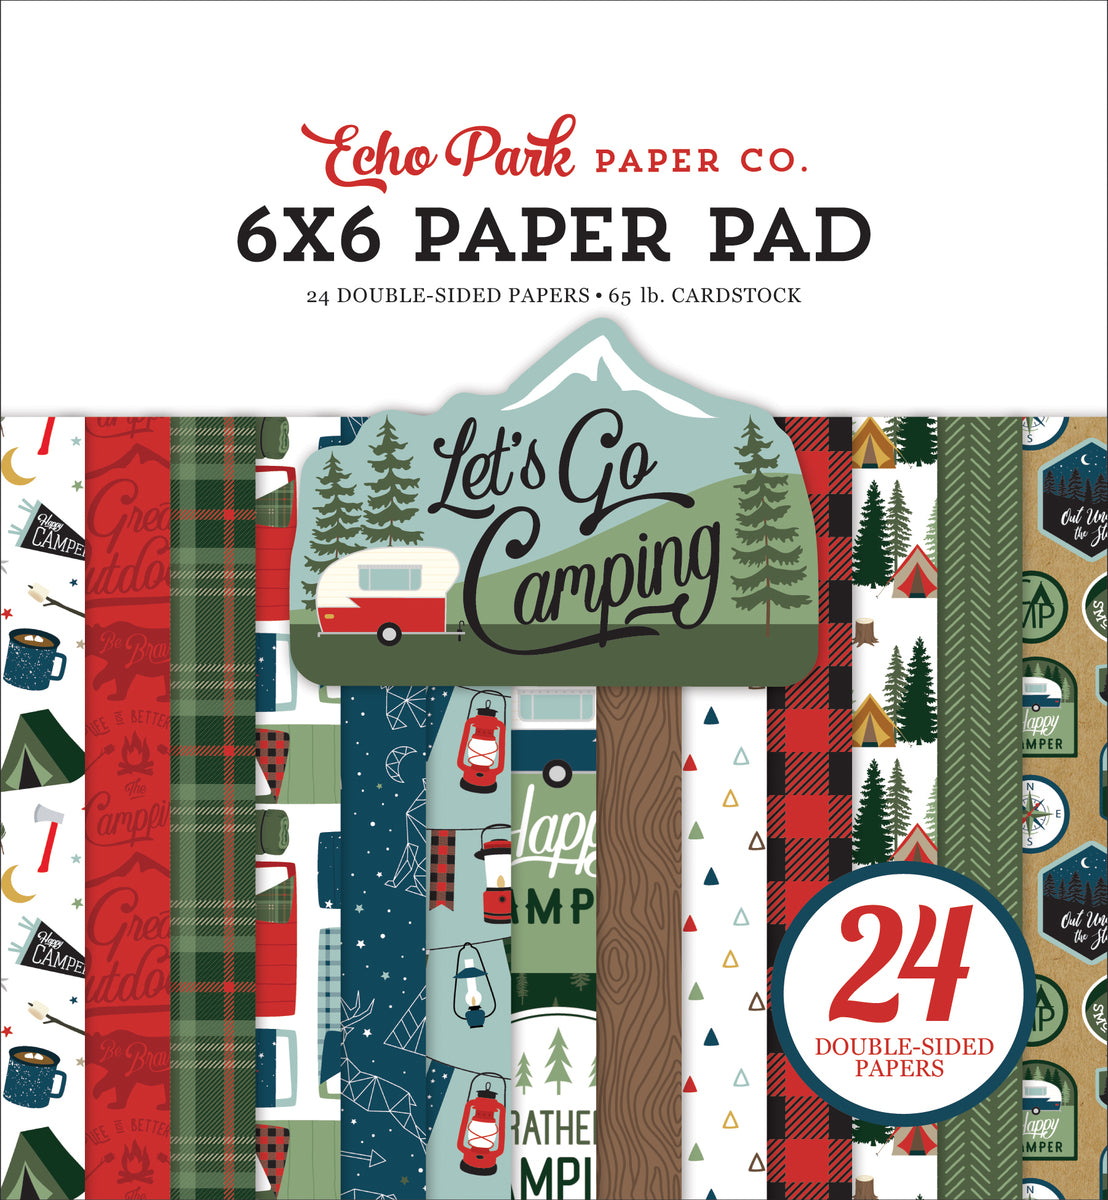 Let's Go Camping 6x6 patterned paper pad from Echo Park Paper